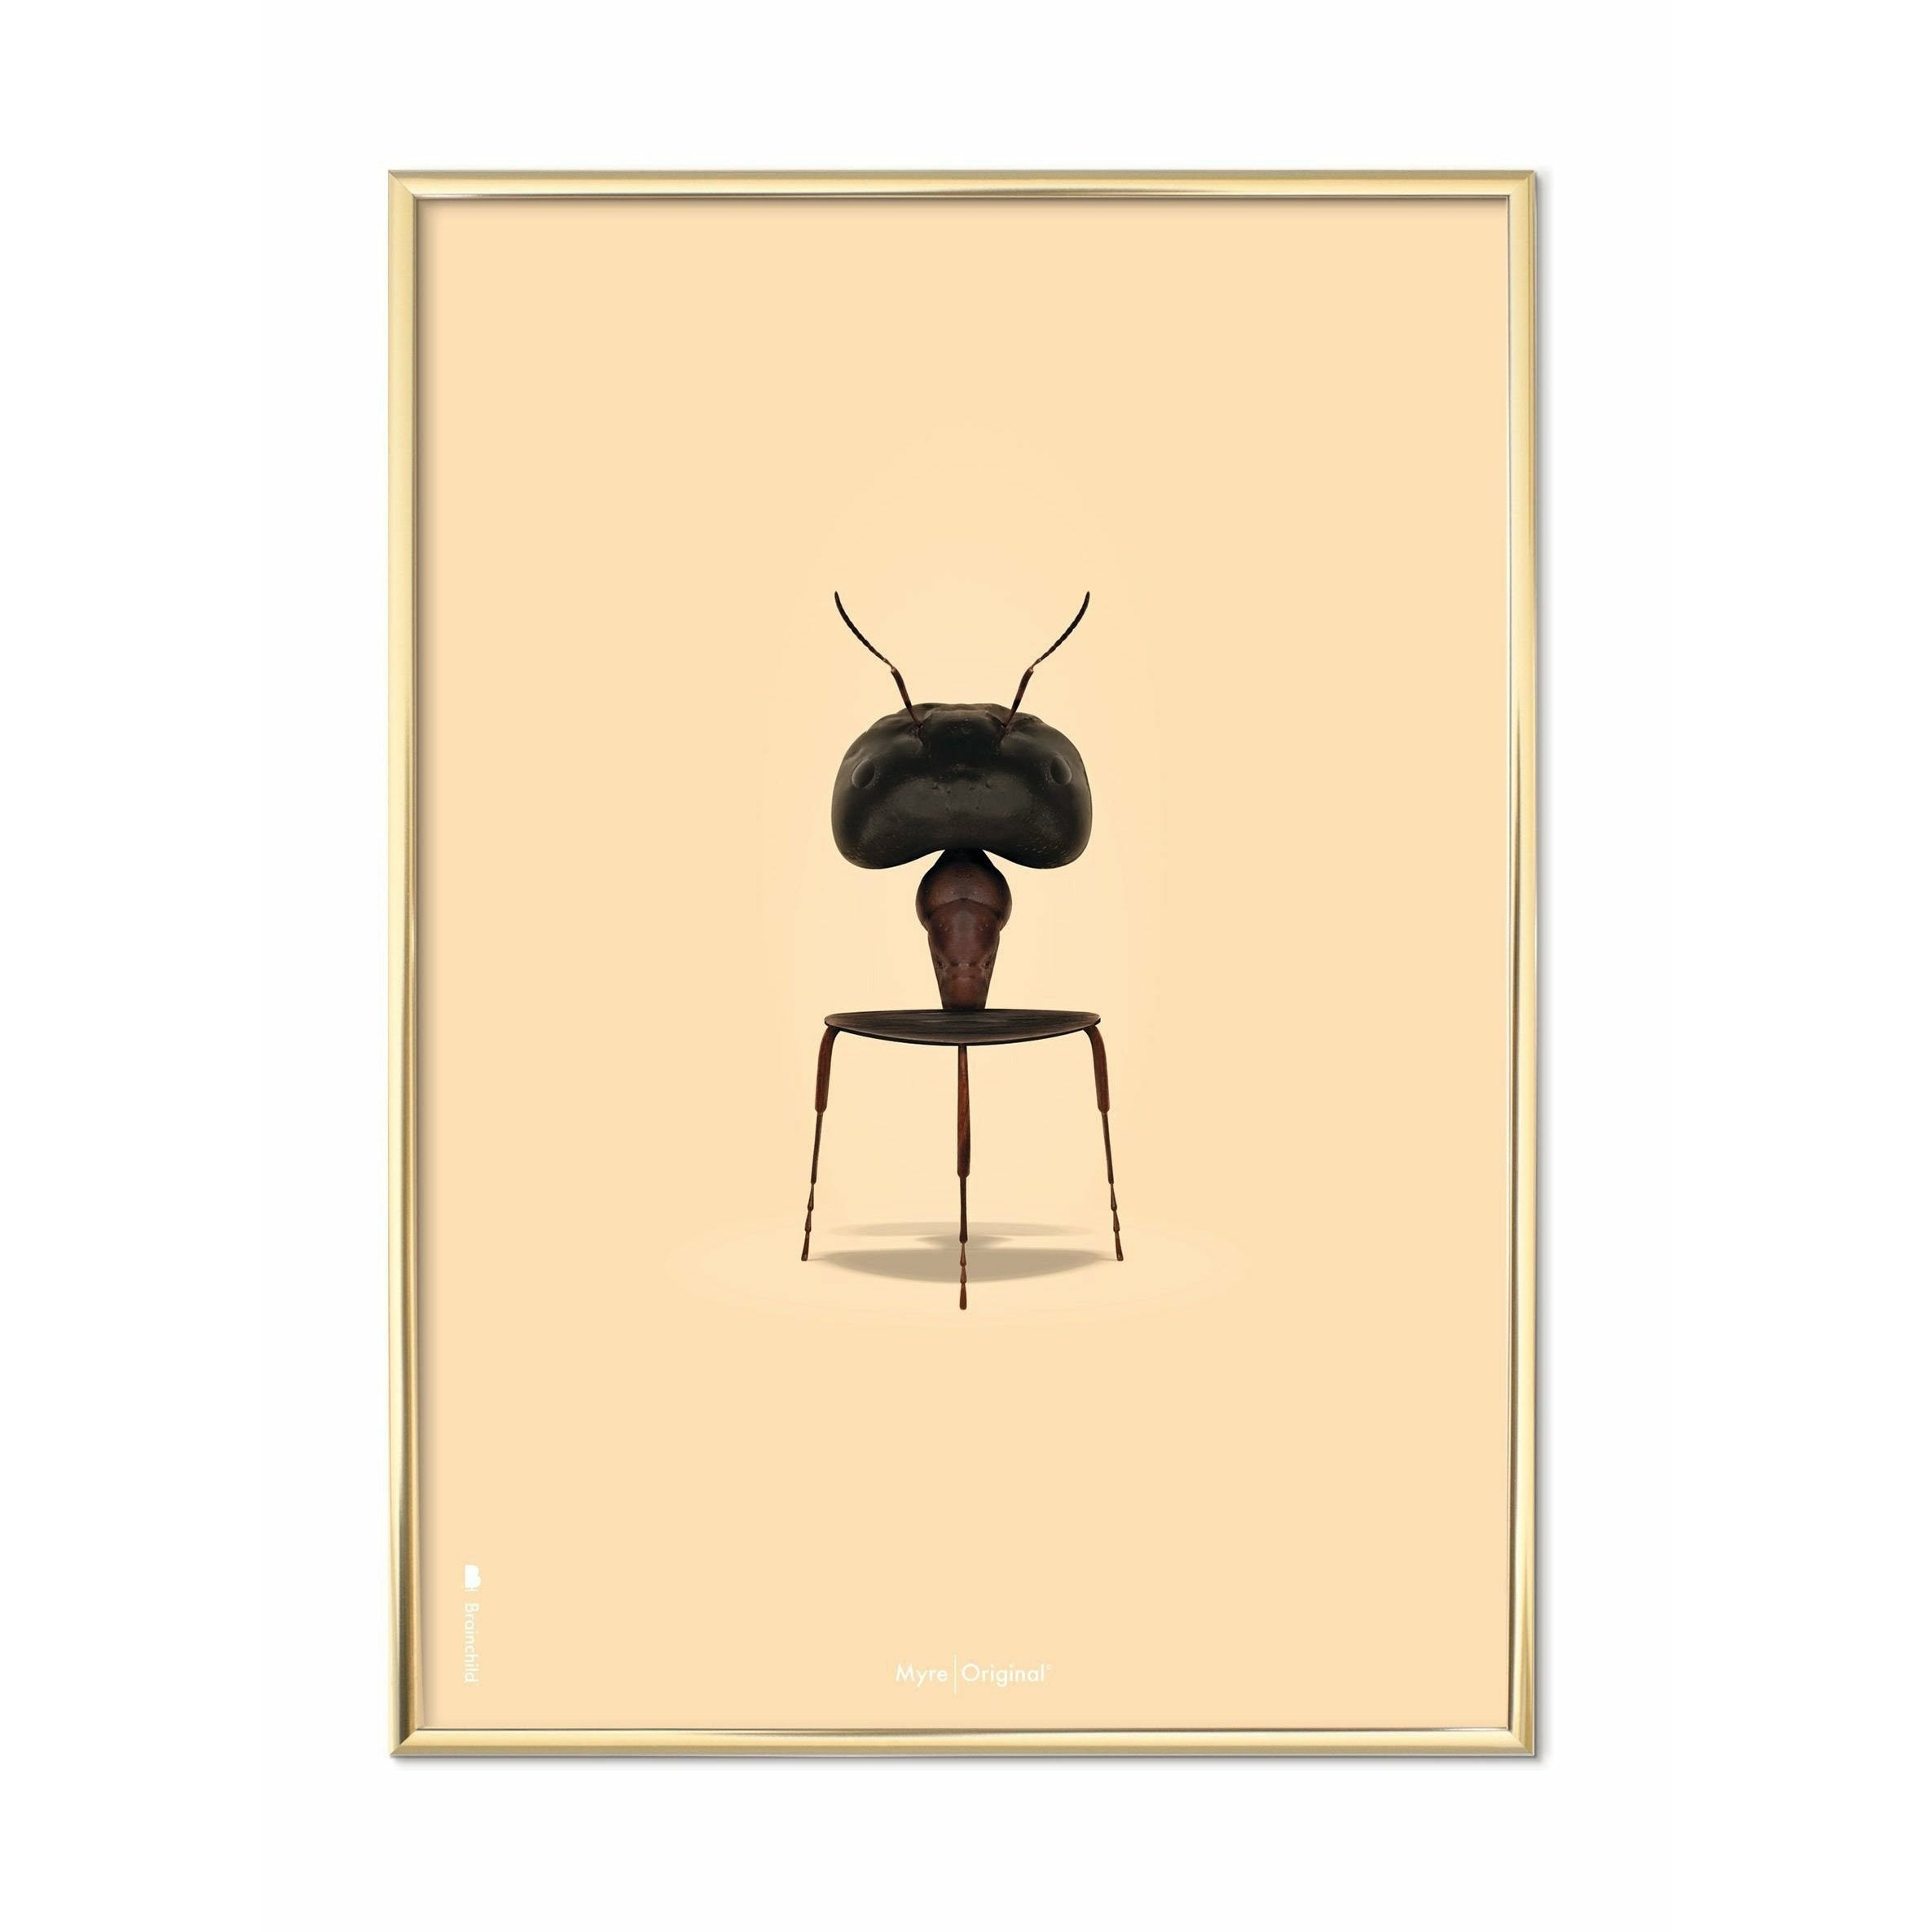 Brainchild Ant Classic Poster, Brass Colored Frame 70 X100 Cm, Sand Colored Background